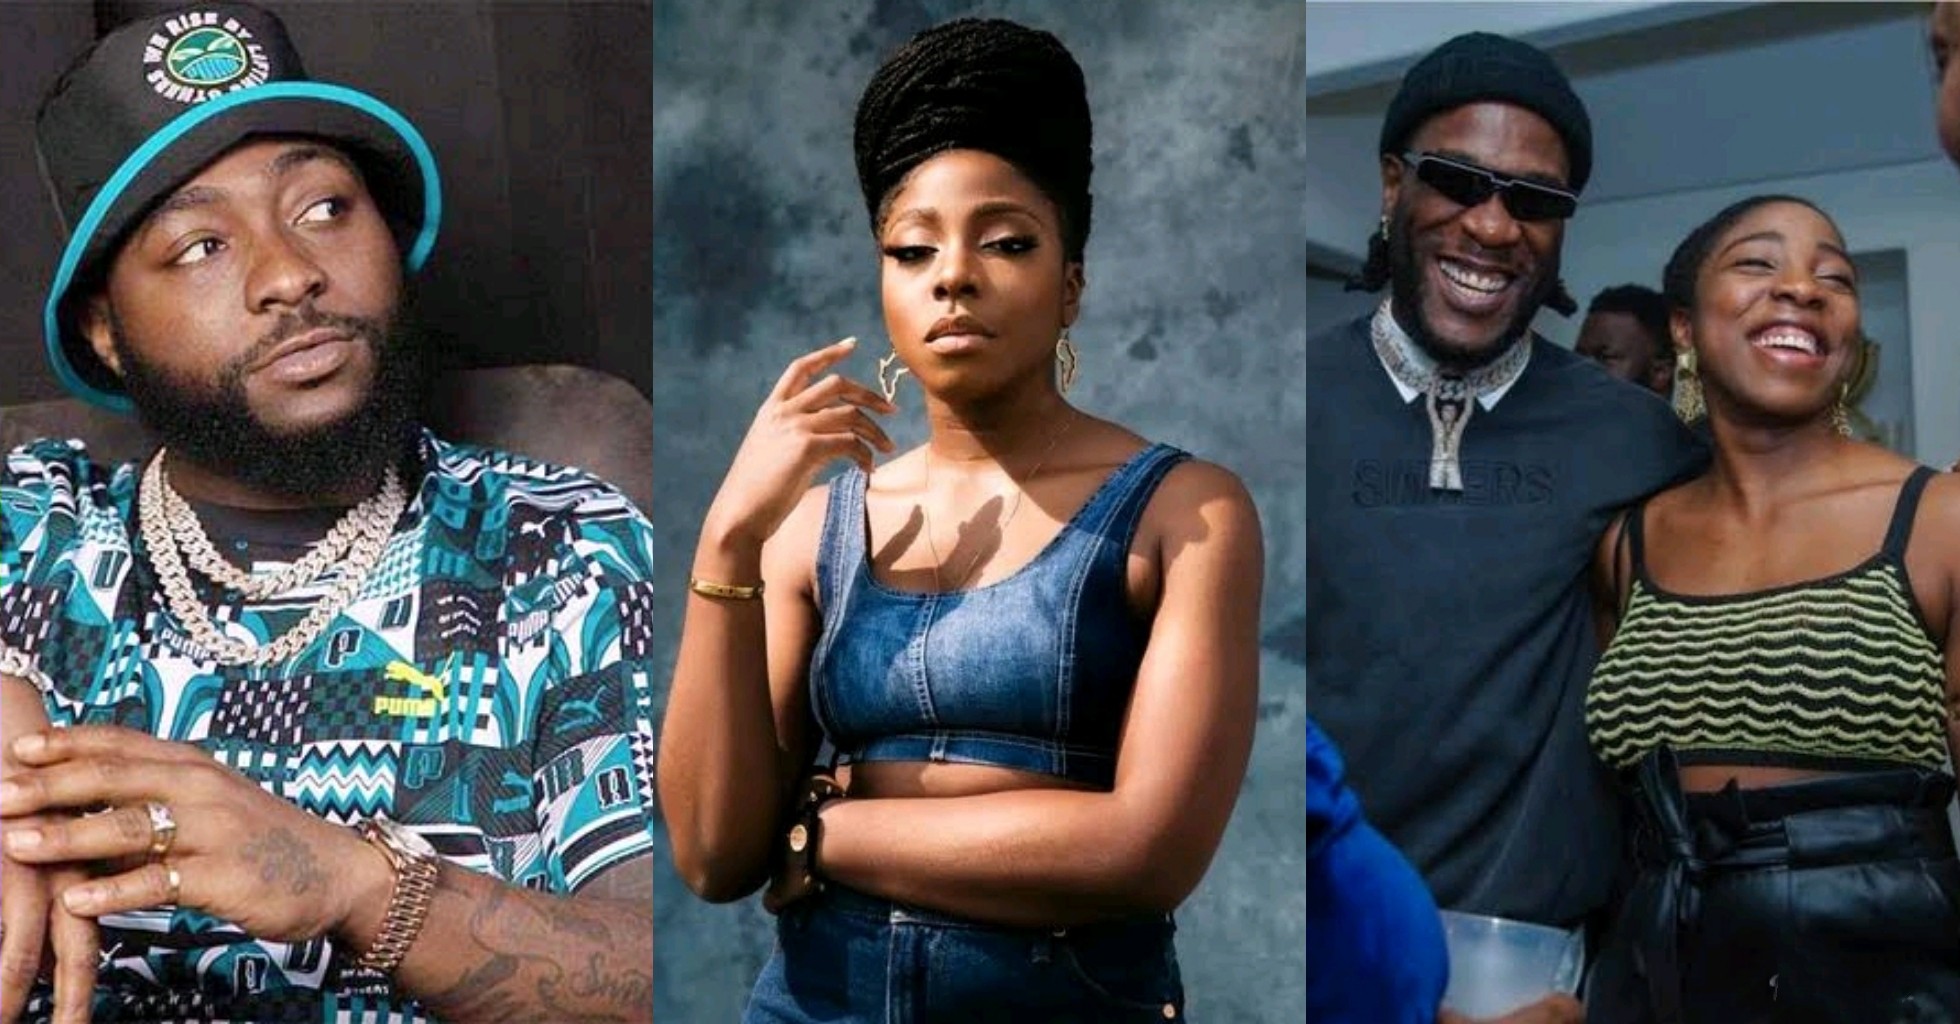 Burna Boy's sister hurls shade at Davido for categorizing brother as 'new cat' in music industry (VIDEO)